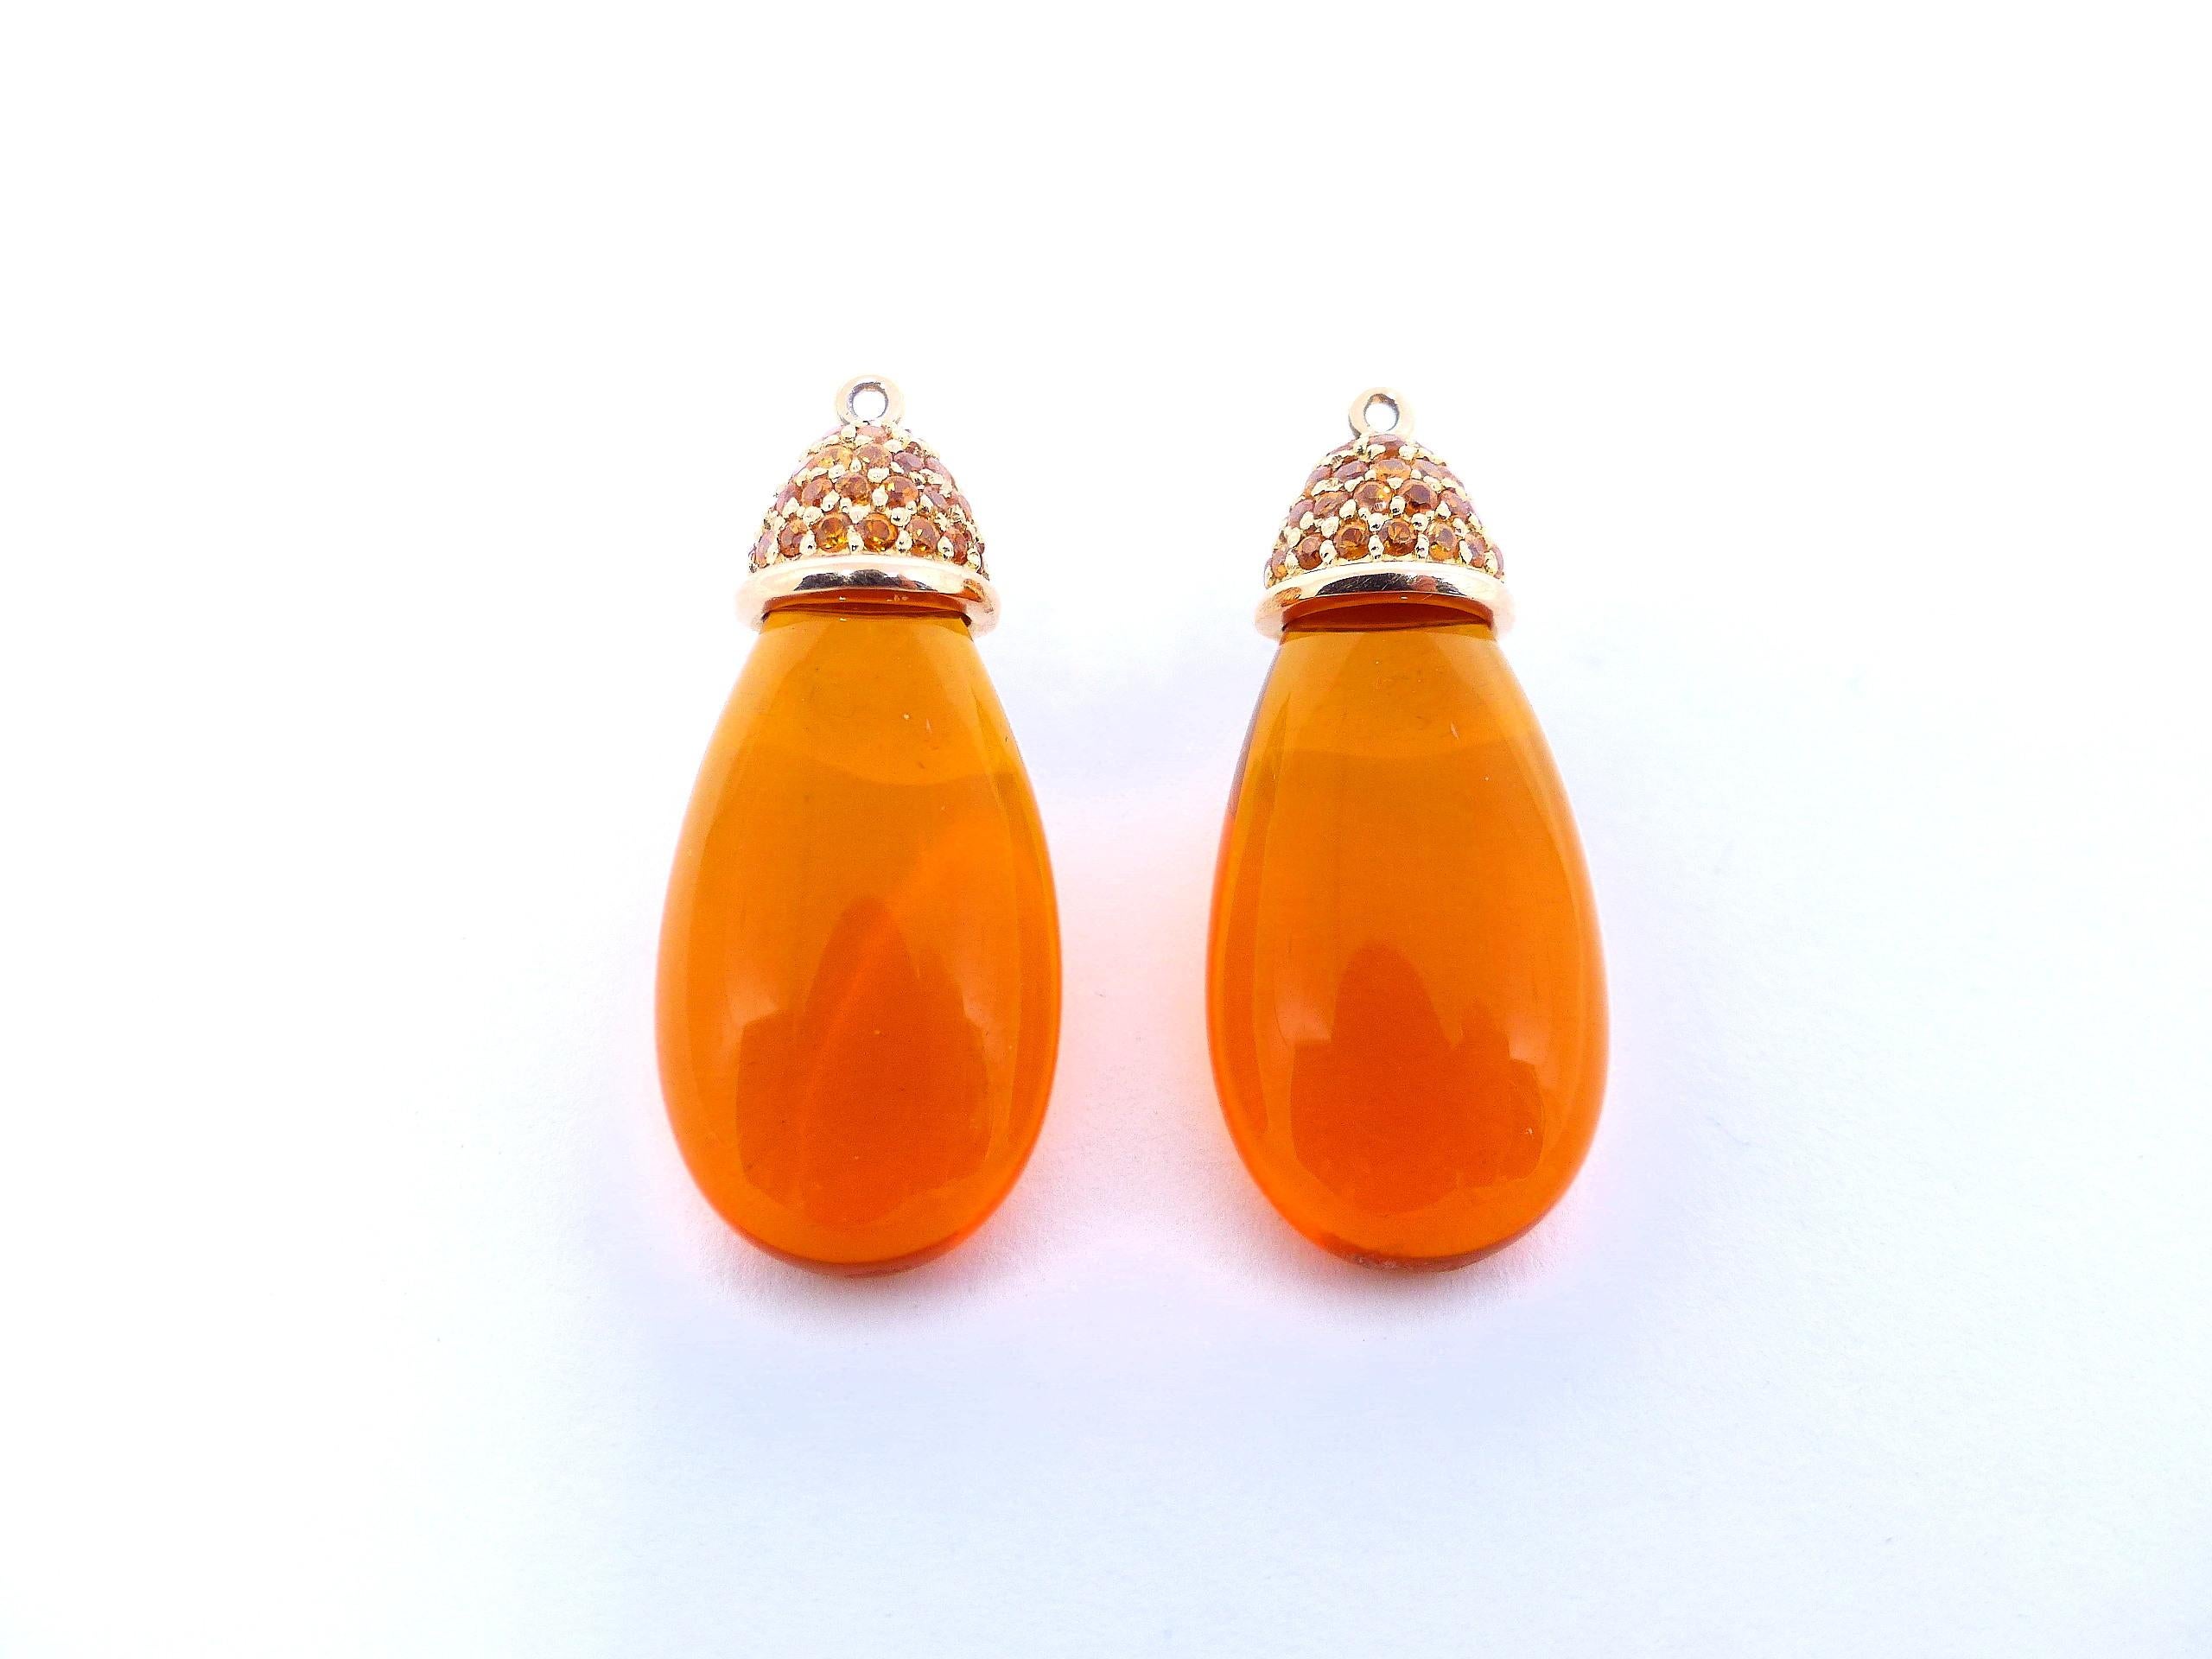 Thomas Leyser is renowned for his contemporary jewellery designs utilizing fine gemstones.

These 18k red gold (20g) earrings are set with 2x fine Mexican Fireopals in intensiv orange colour (briolette-cut, 25x13x8mm, 29.49ct) + 96x fine Mandarin